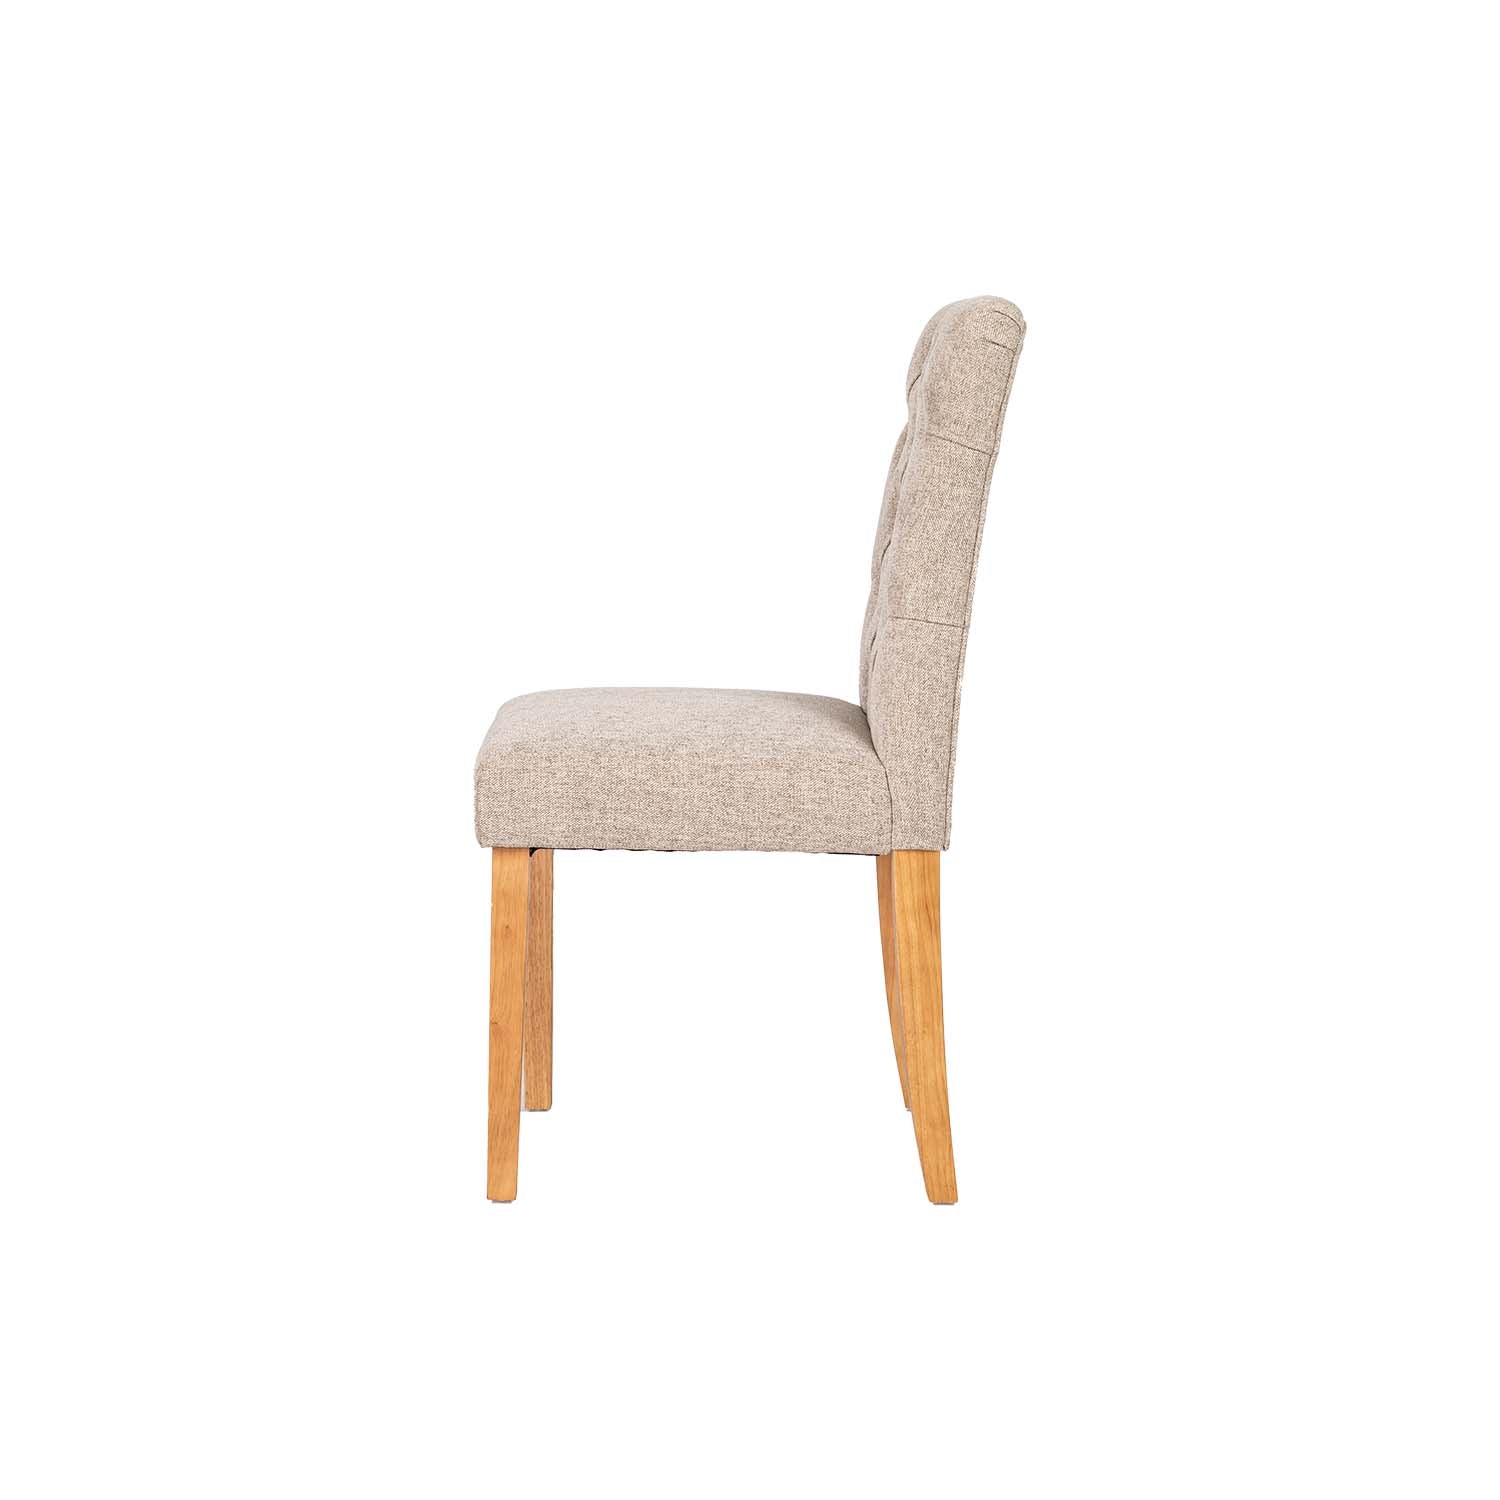 Lucetta Solid Wood Dining Chair